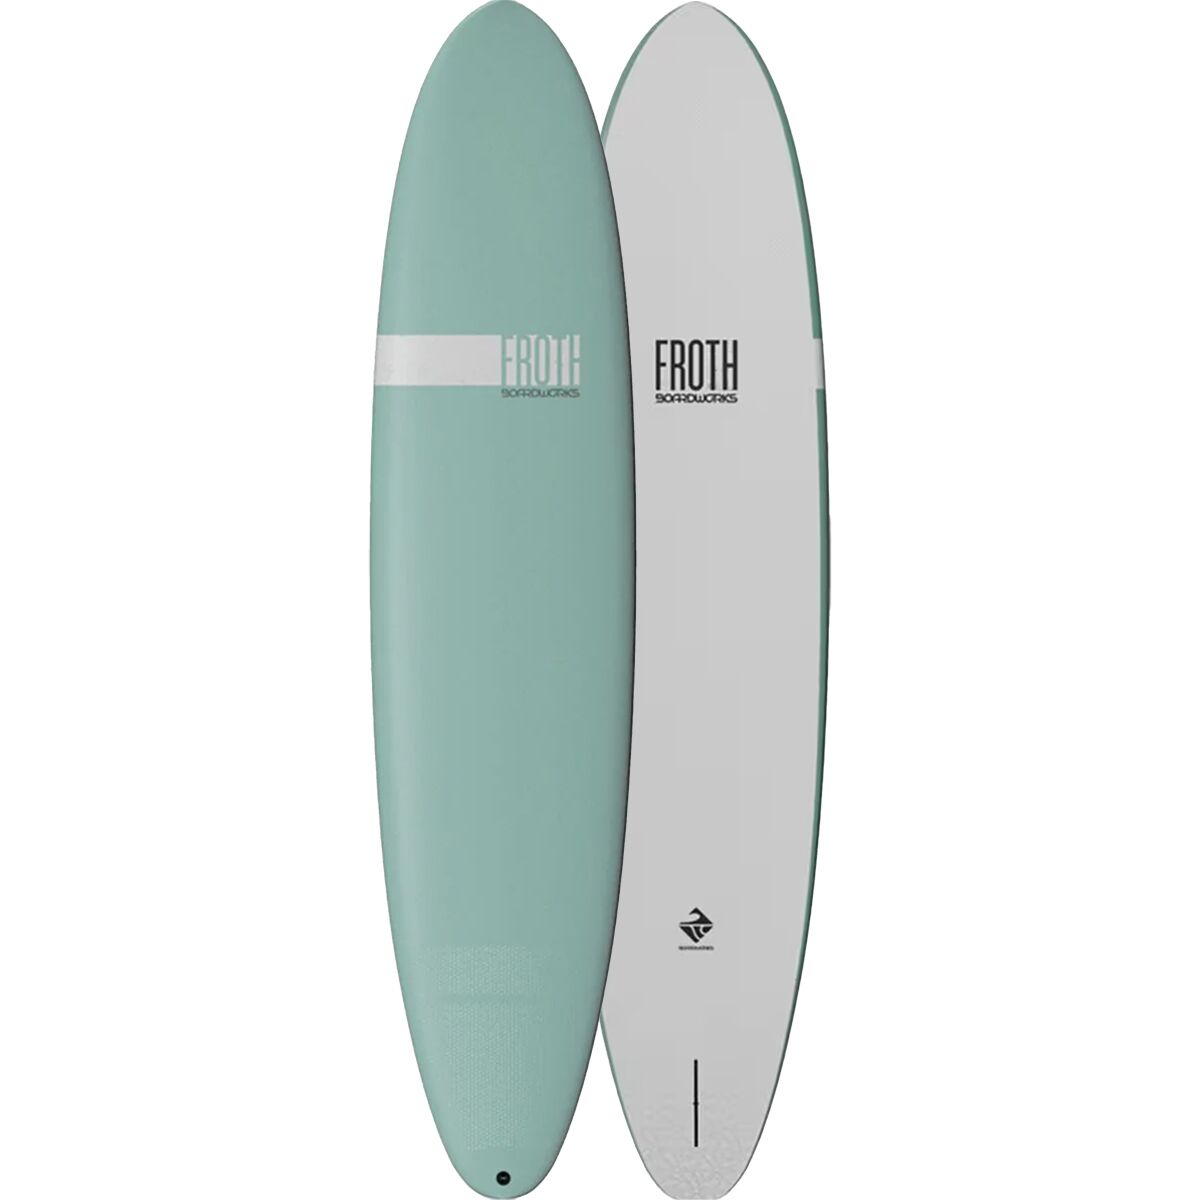 56 Boardworks Froth Soft Top Surfboard Plum/Sky 